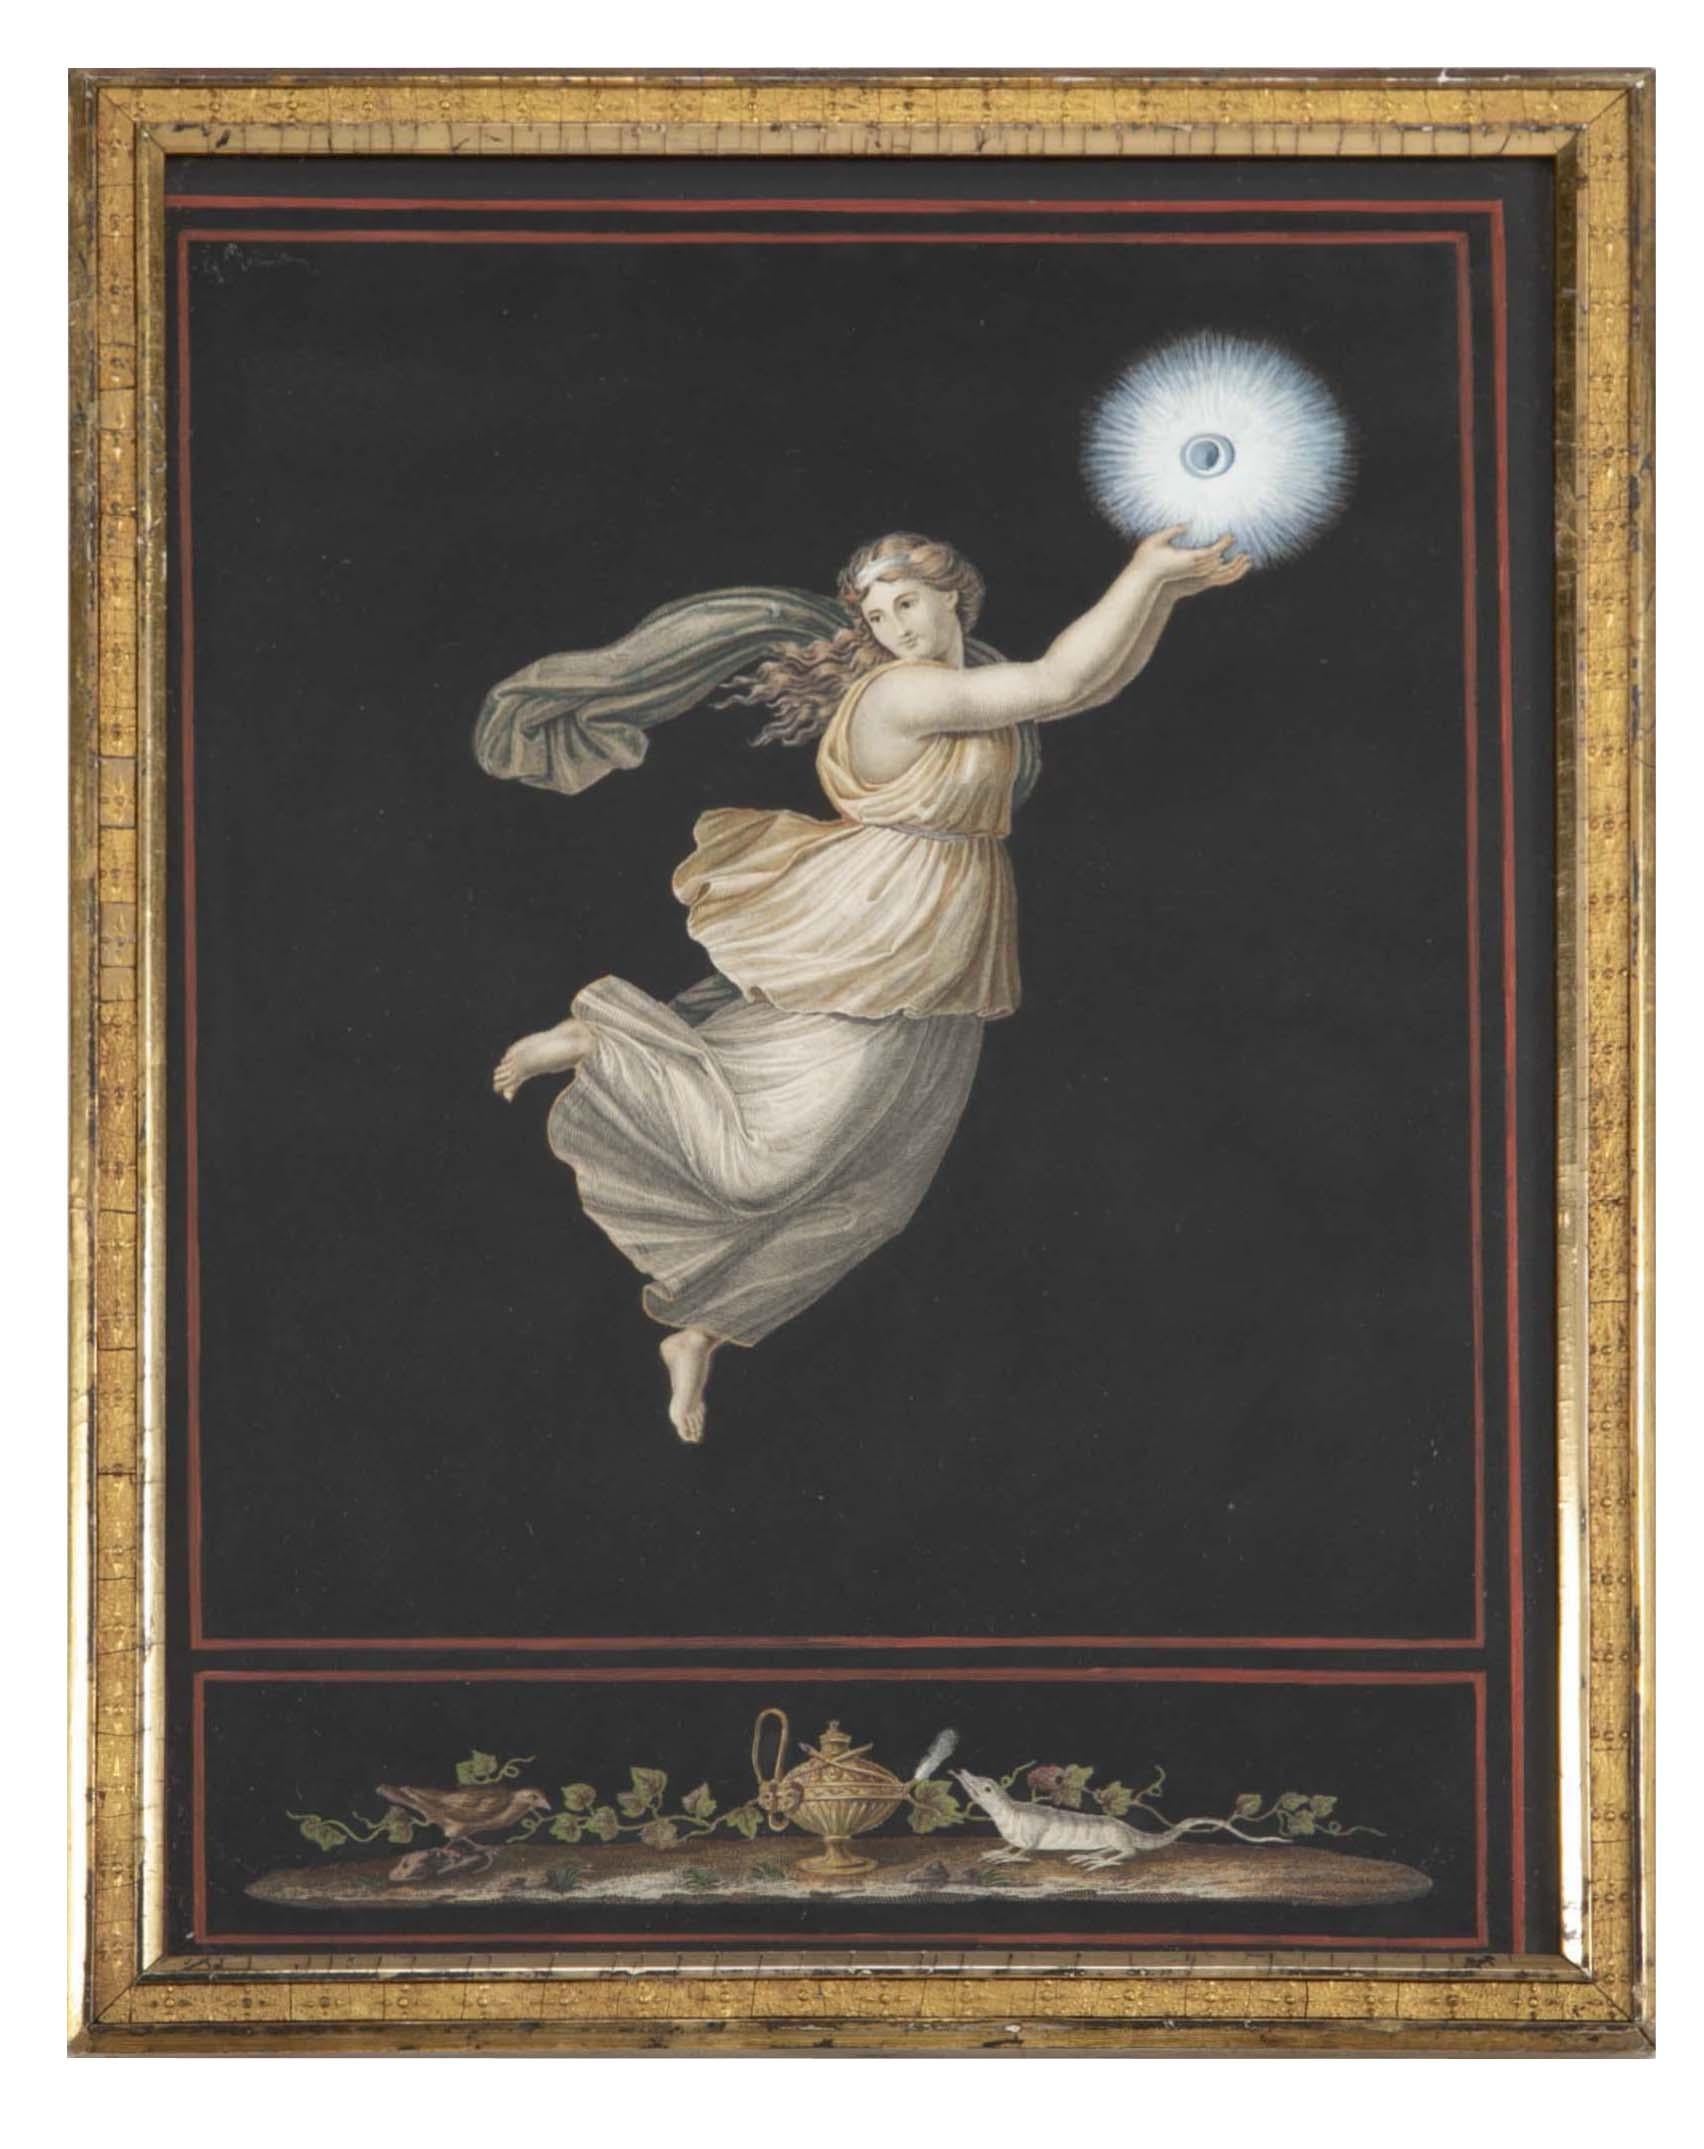 A group of six allegorical female figures after Raffaello Sanzio, called Raphael, published in Paris by Alexandre Richome, circa 1803-1806. Set of six copper engravings with original hand-coloring in gouache after the frescoes in Cardinal Bibbiena's